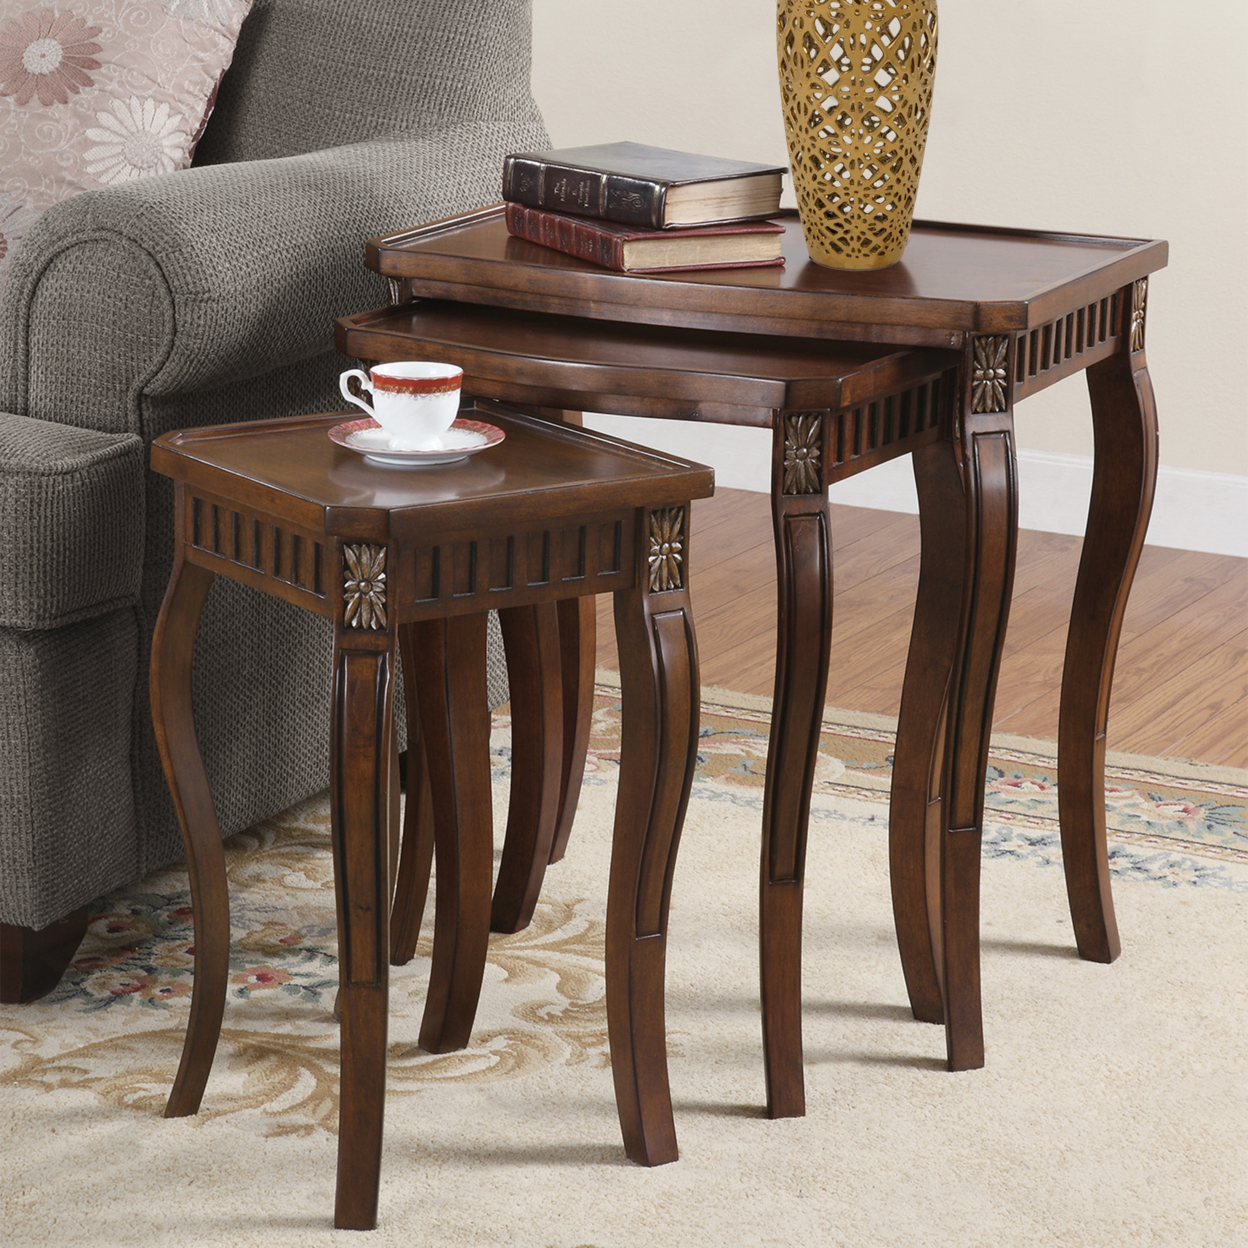 Set Of 3 Wooden Nesting Tables With Curved Legs, Brown- Saltoro Sherpi